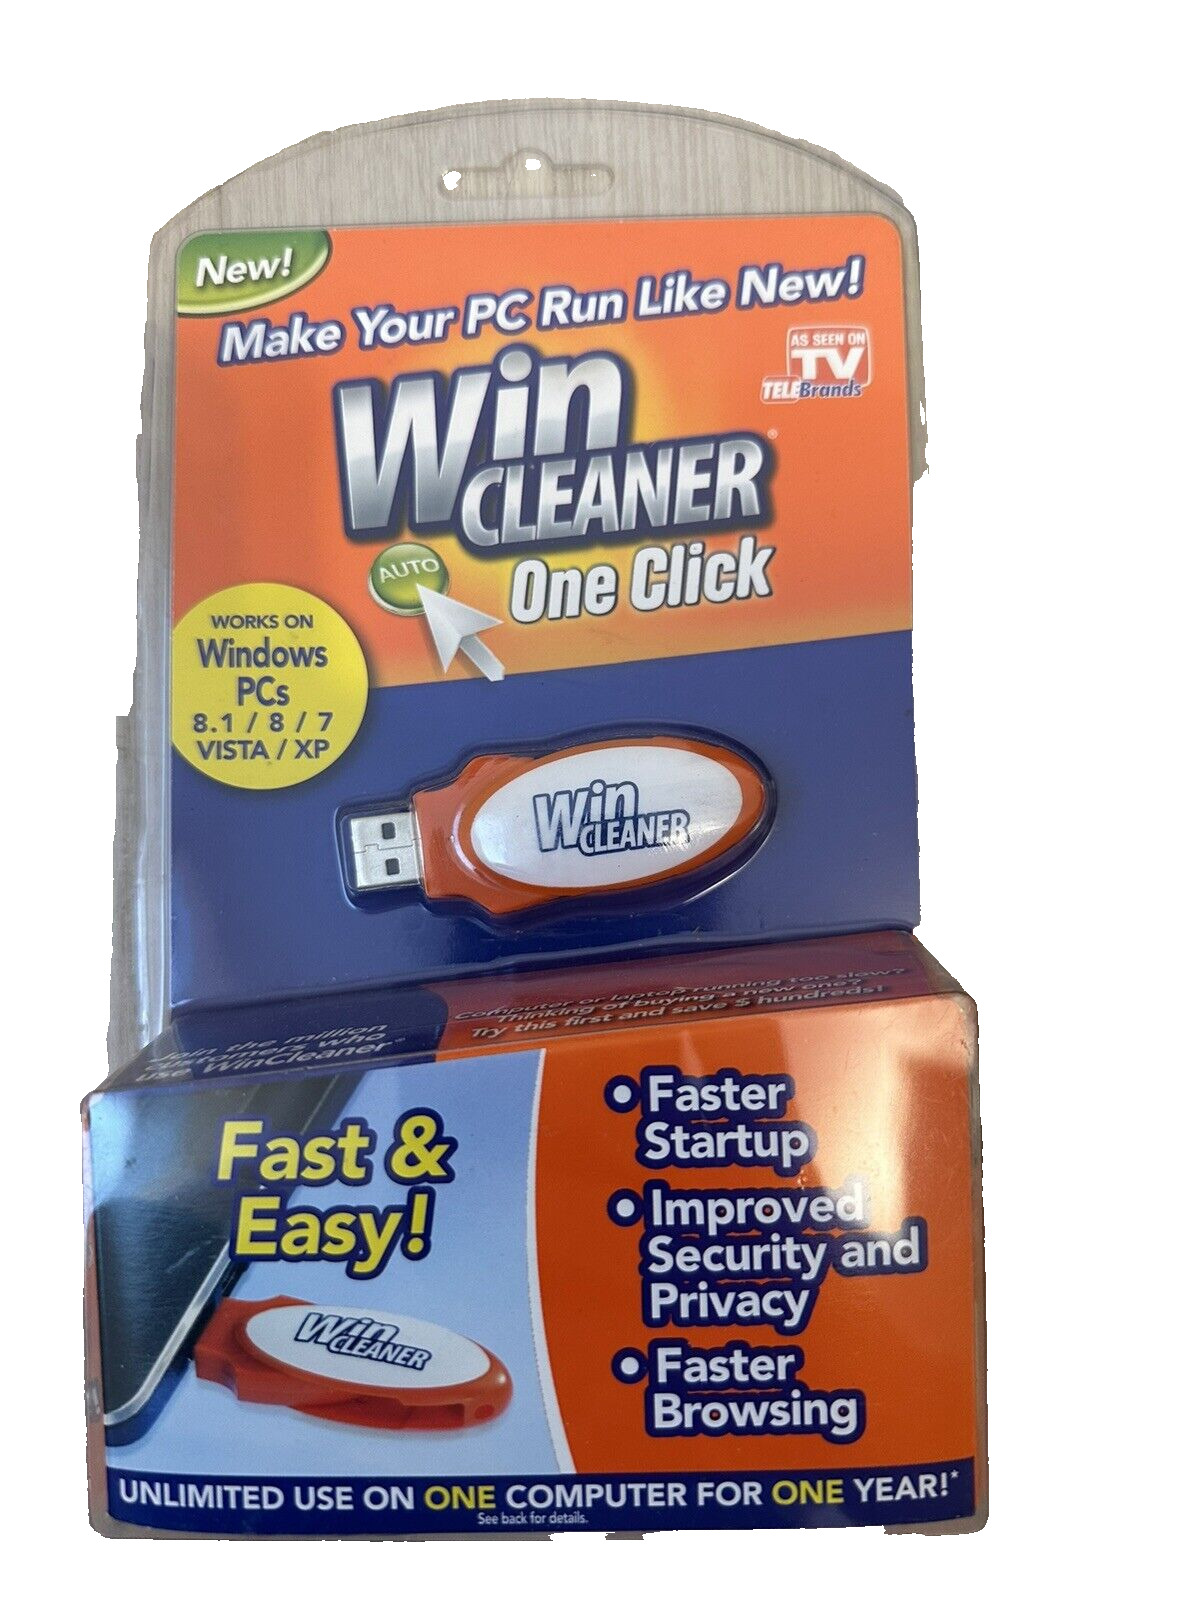 Win Cleaner One Click Professional USB Computer Clean Repair for PC Laptop NEW